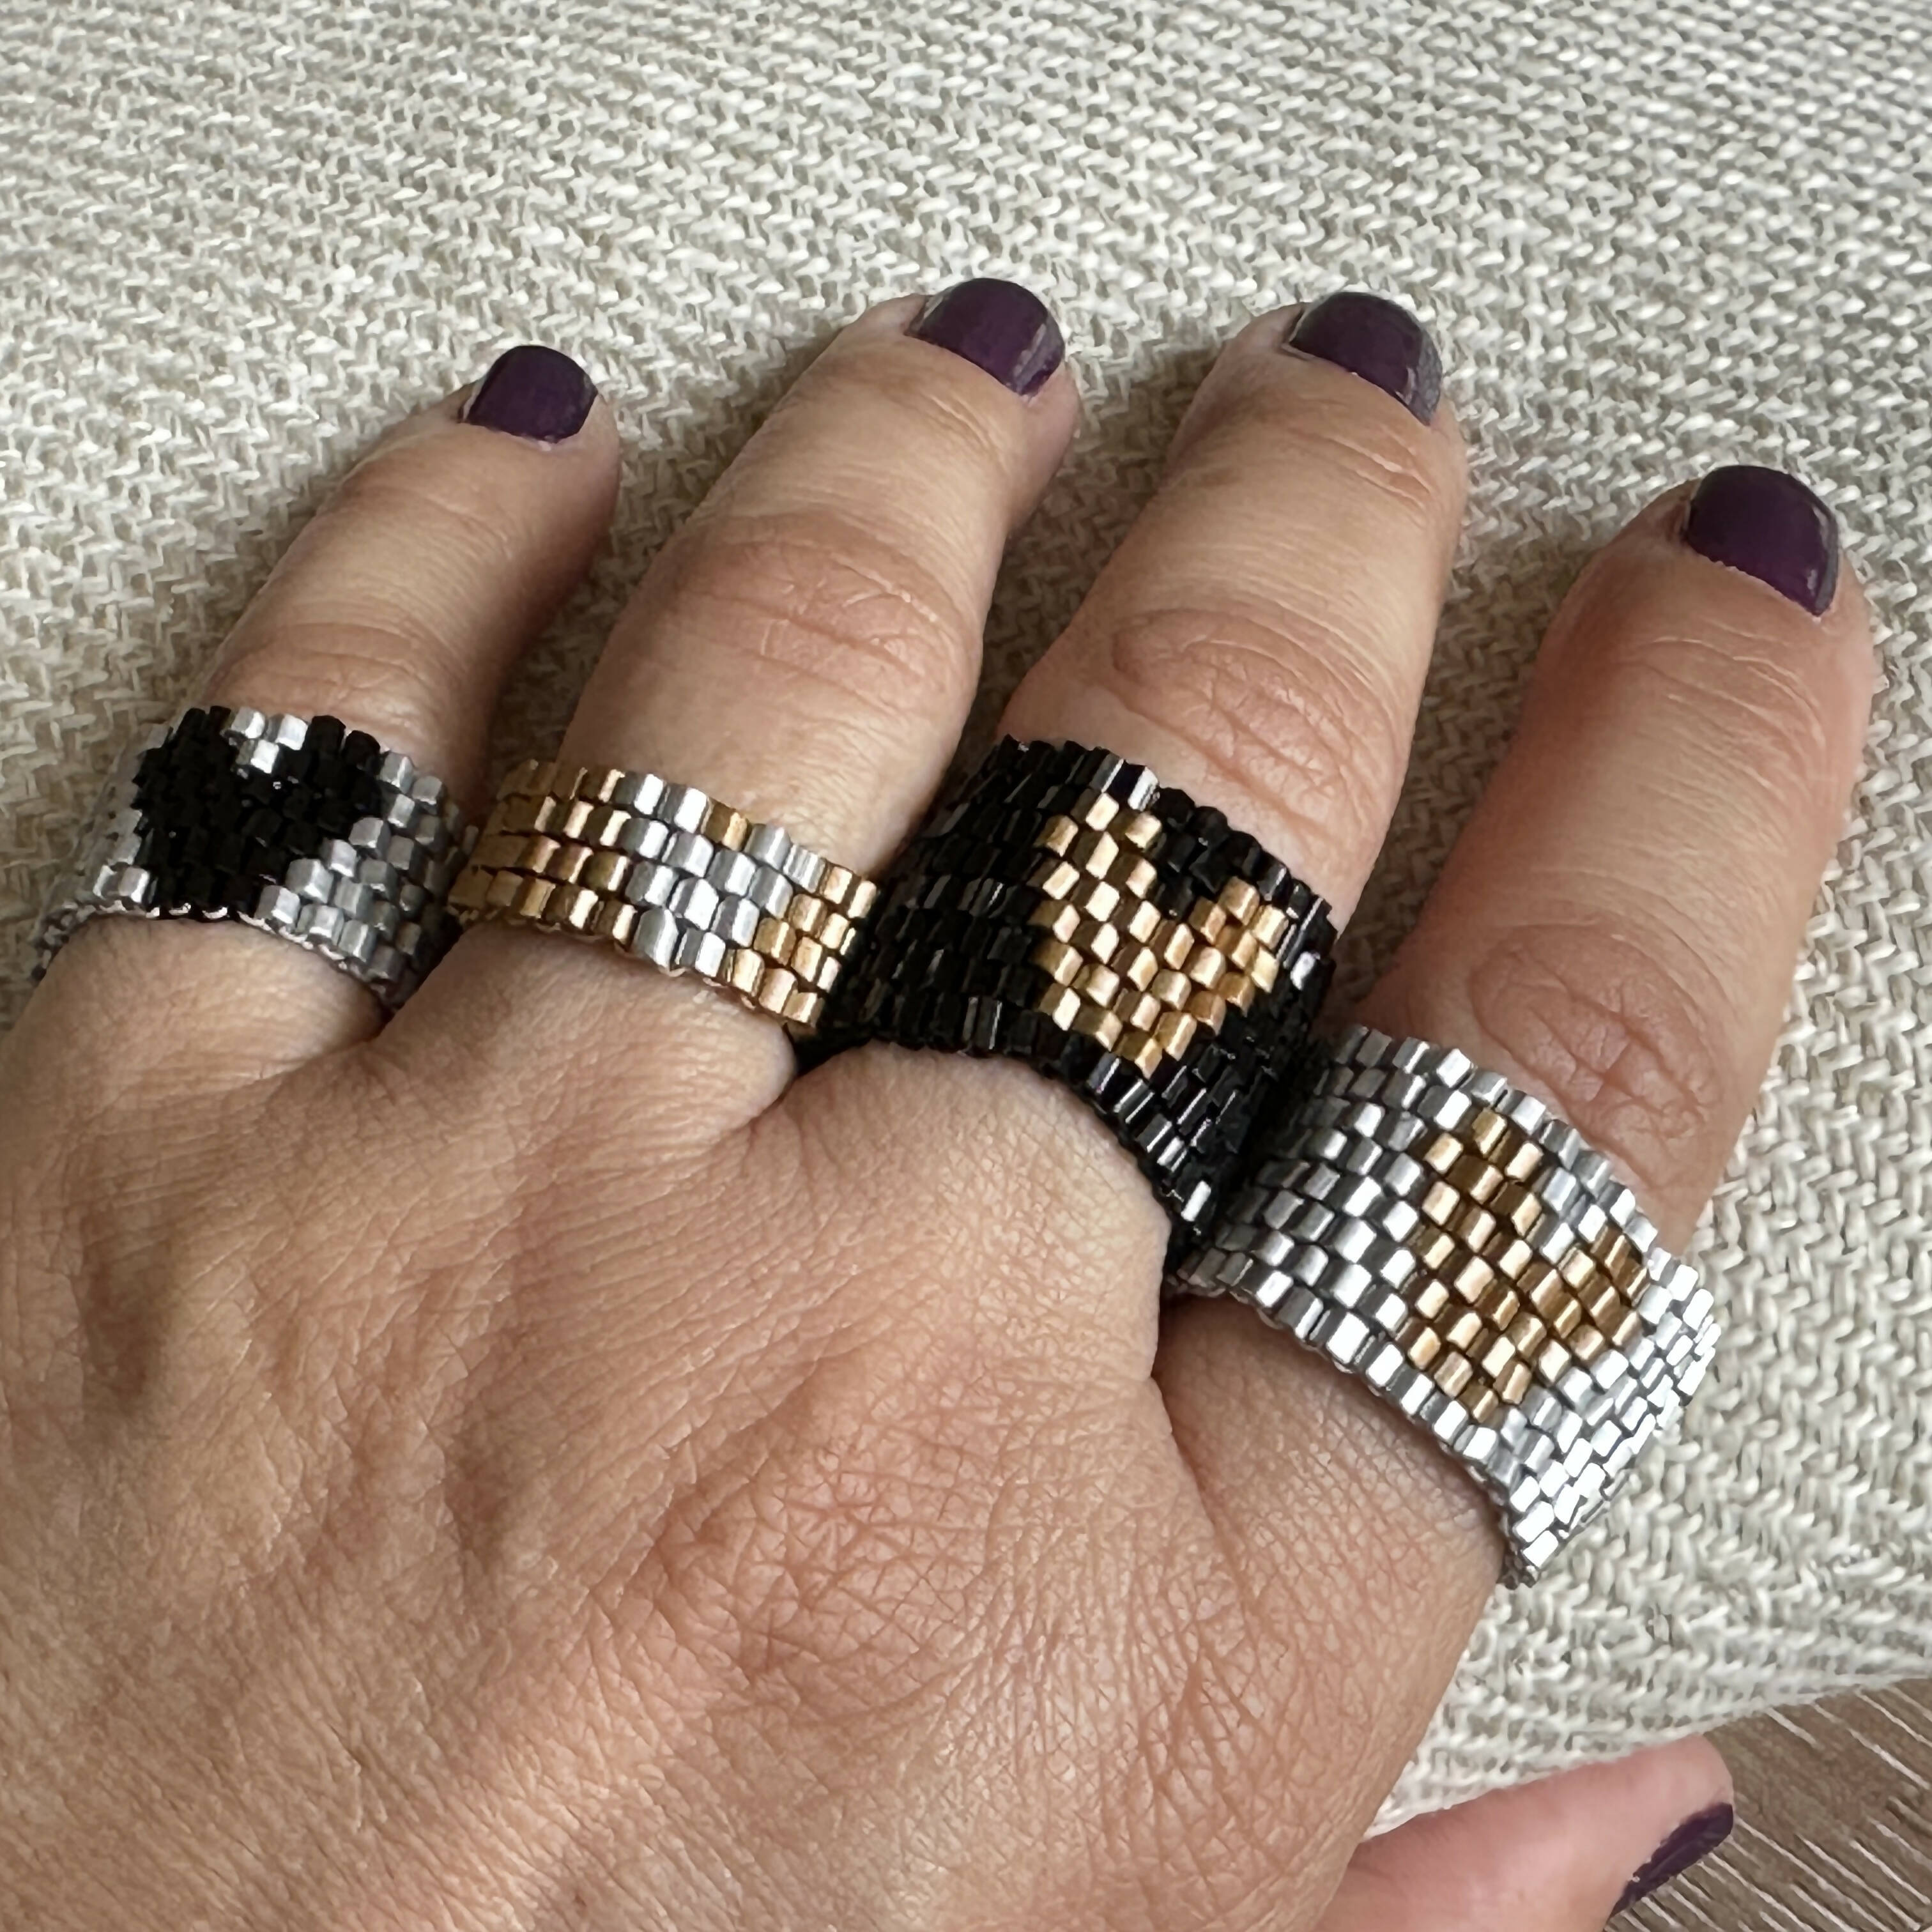 The PUT A RING ON IT collection: Silver heart on gold, 4 rows!